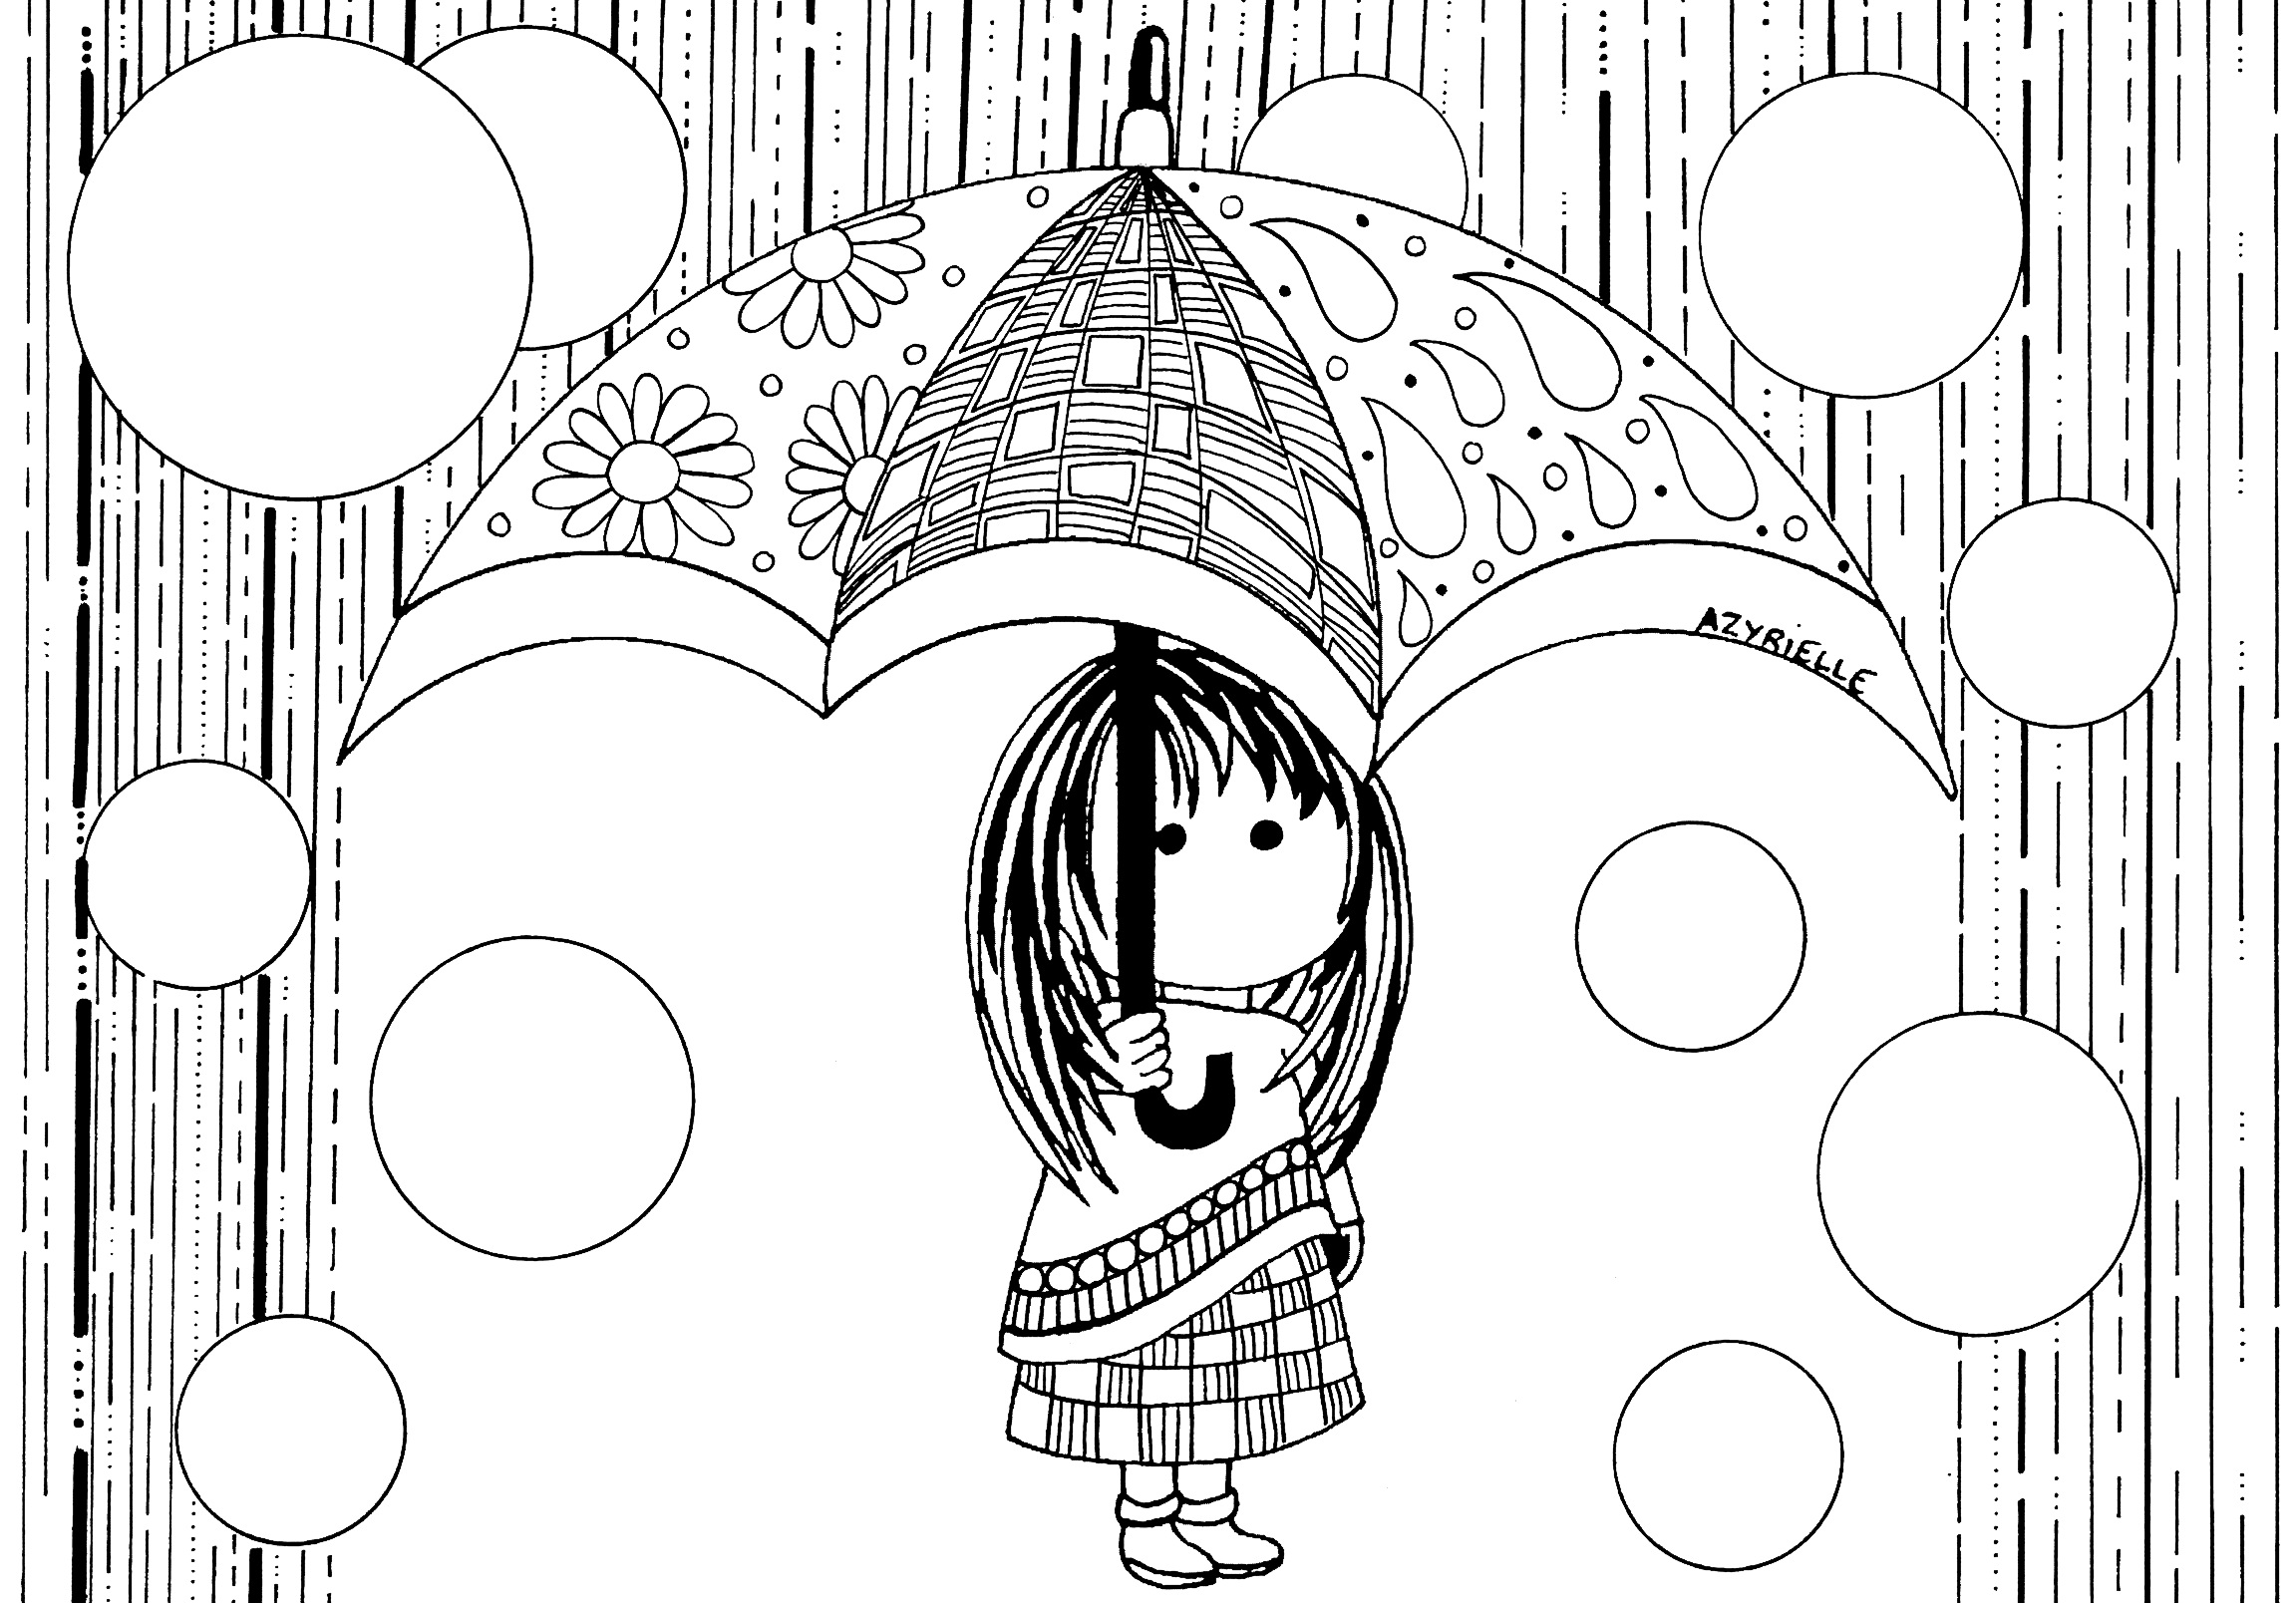 660 Coloring Pages For Adults Rain Images & Pictures In HD